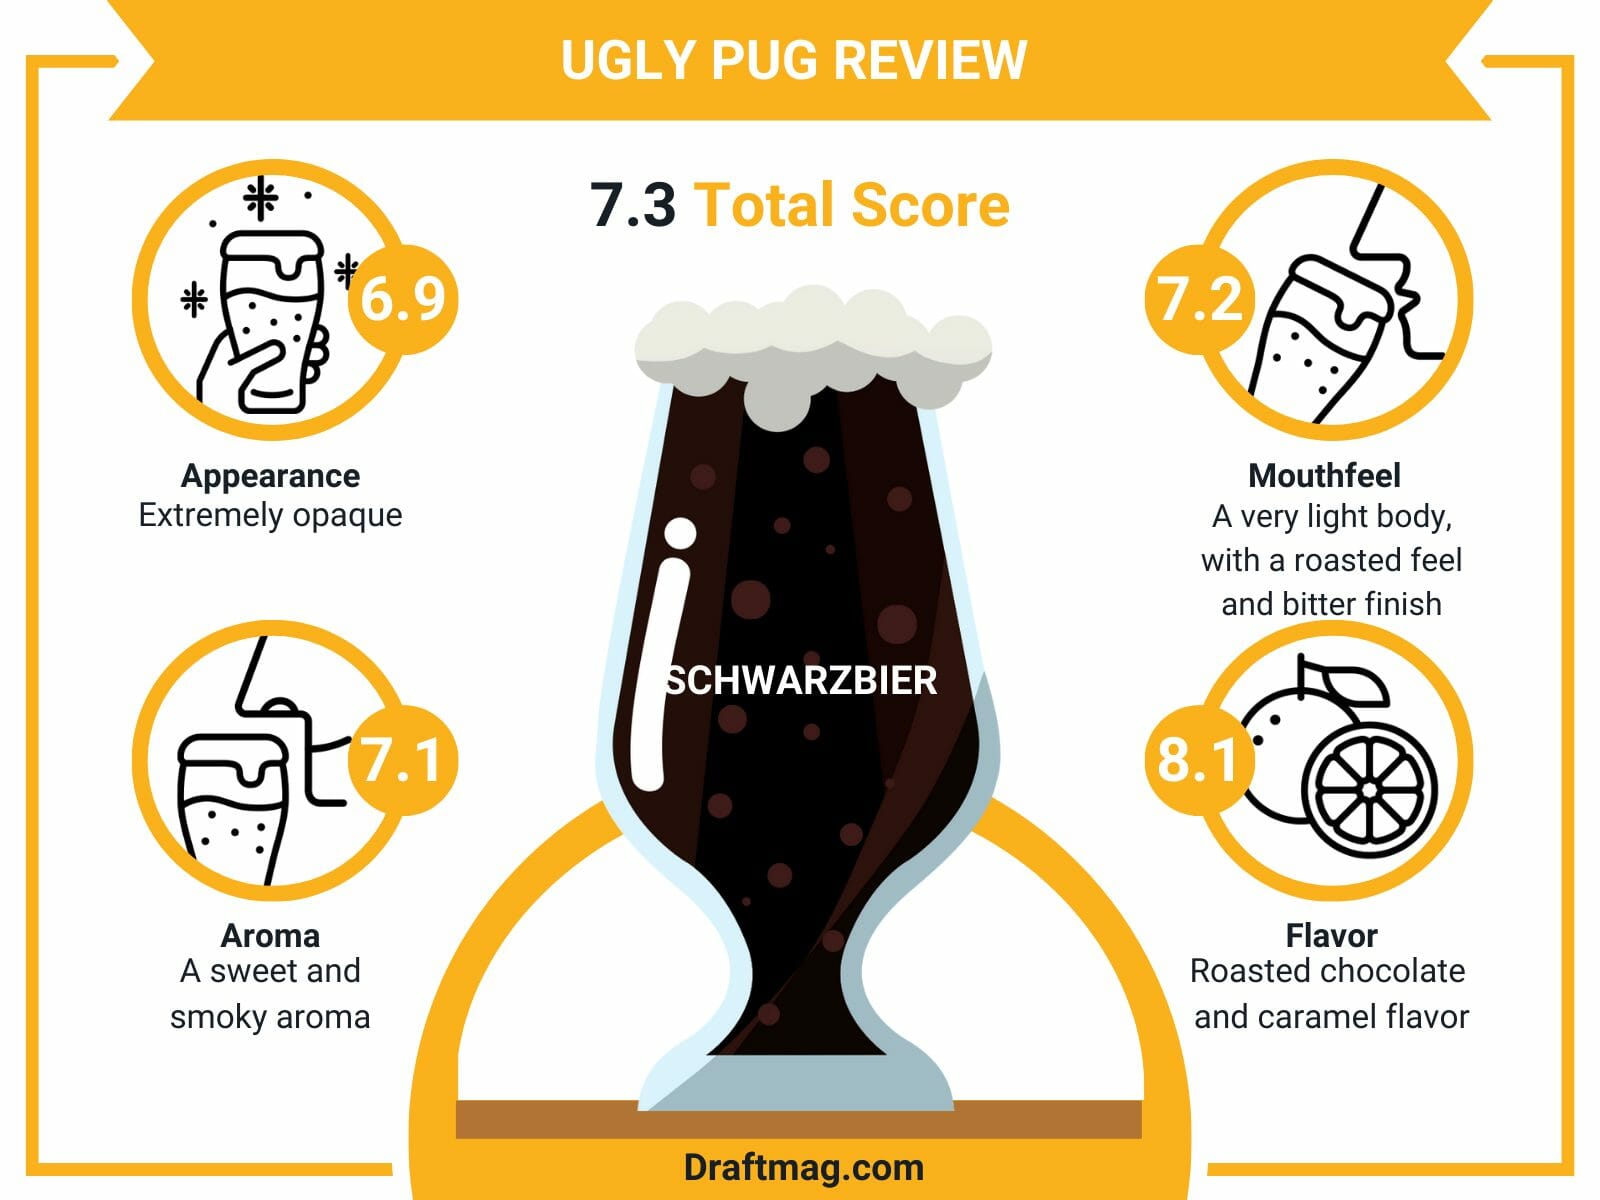 Ugly pug review infographic